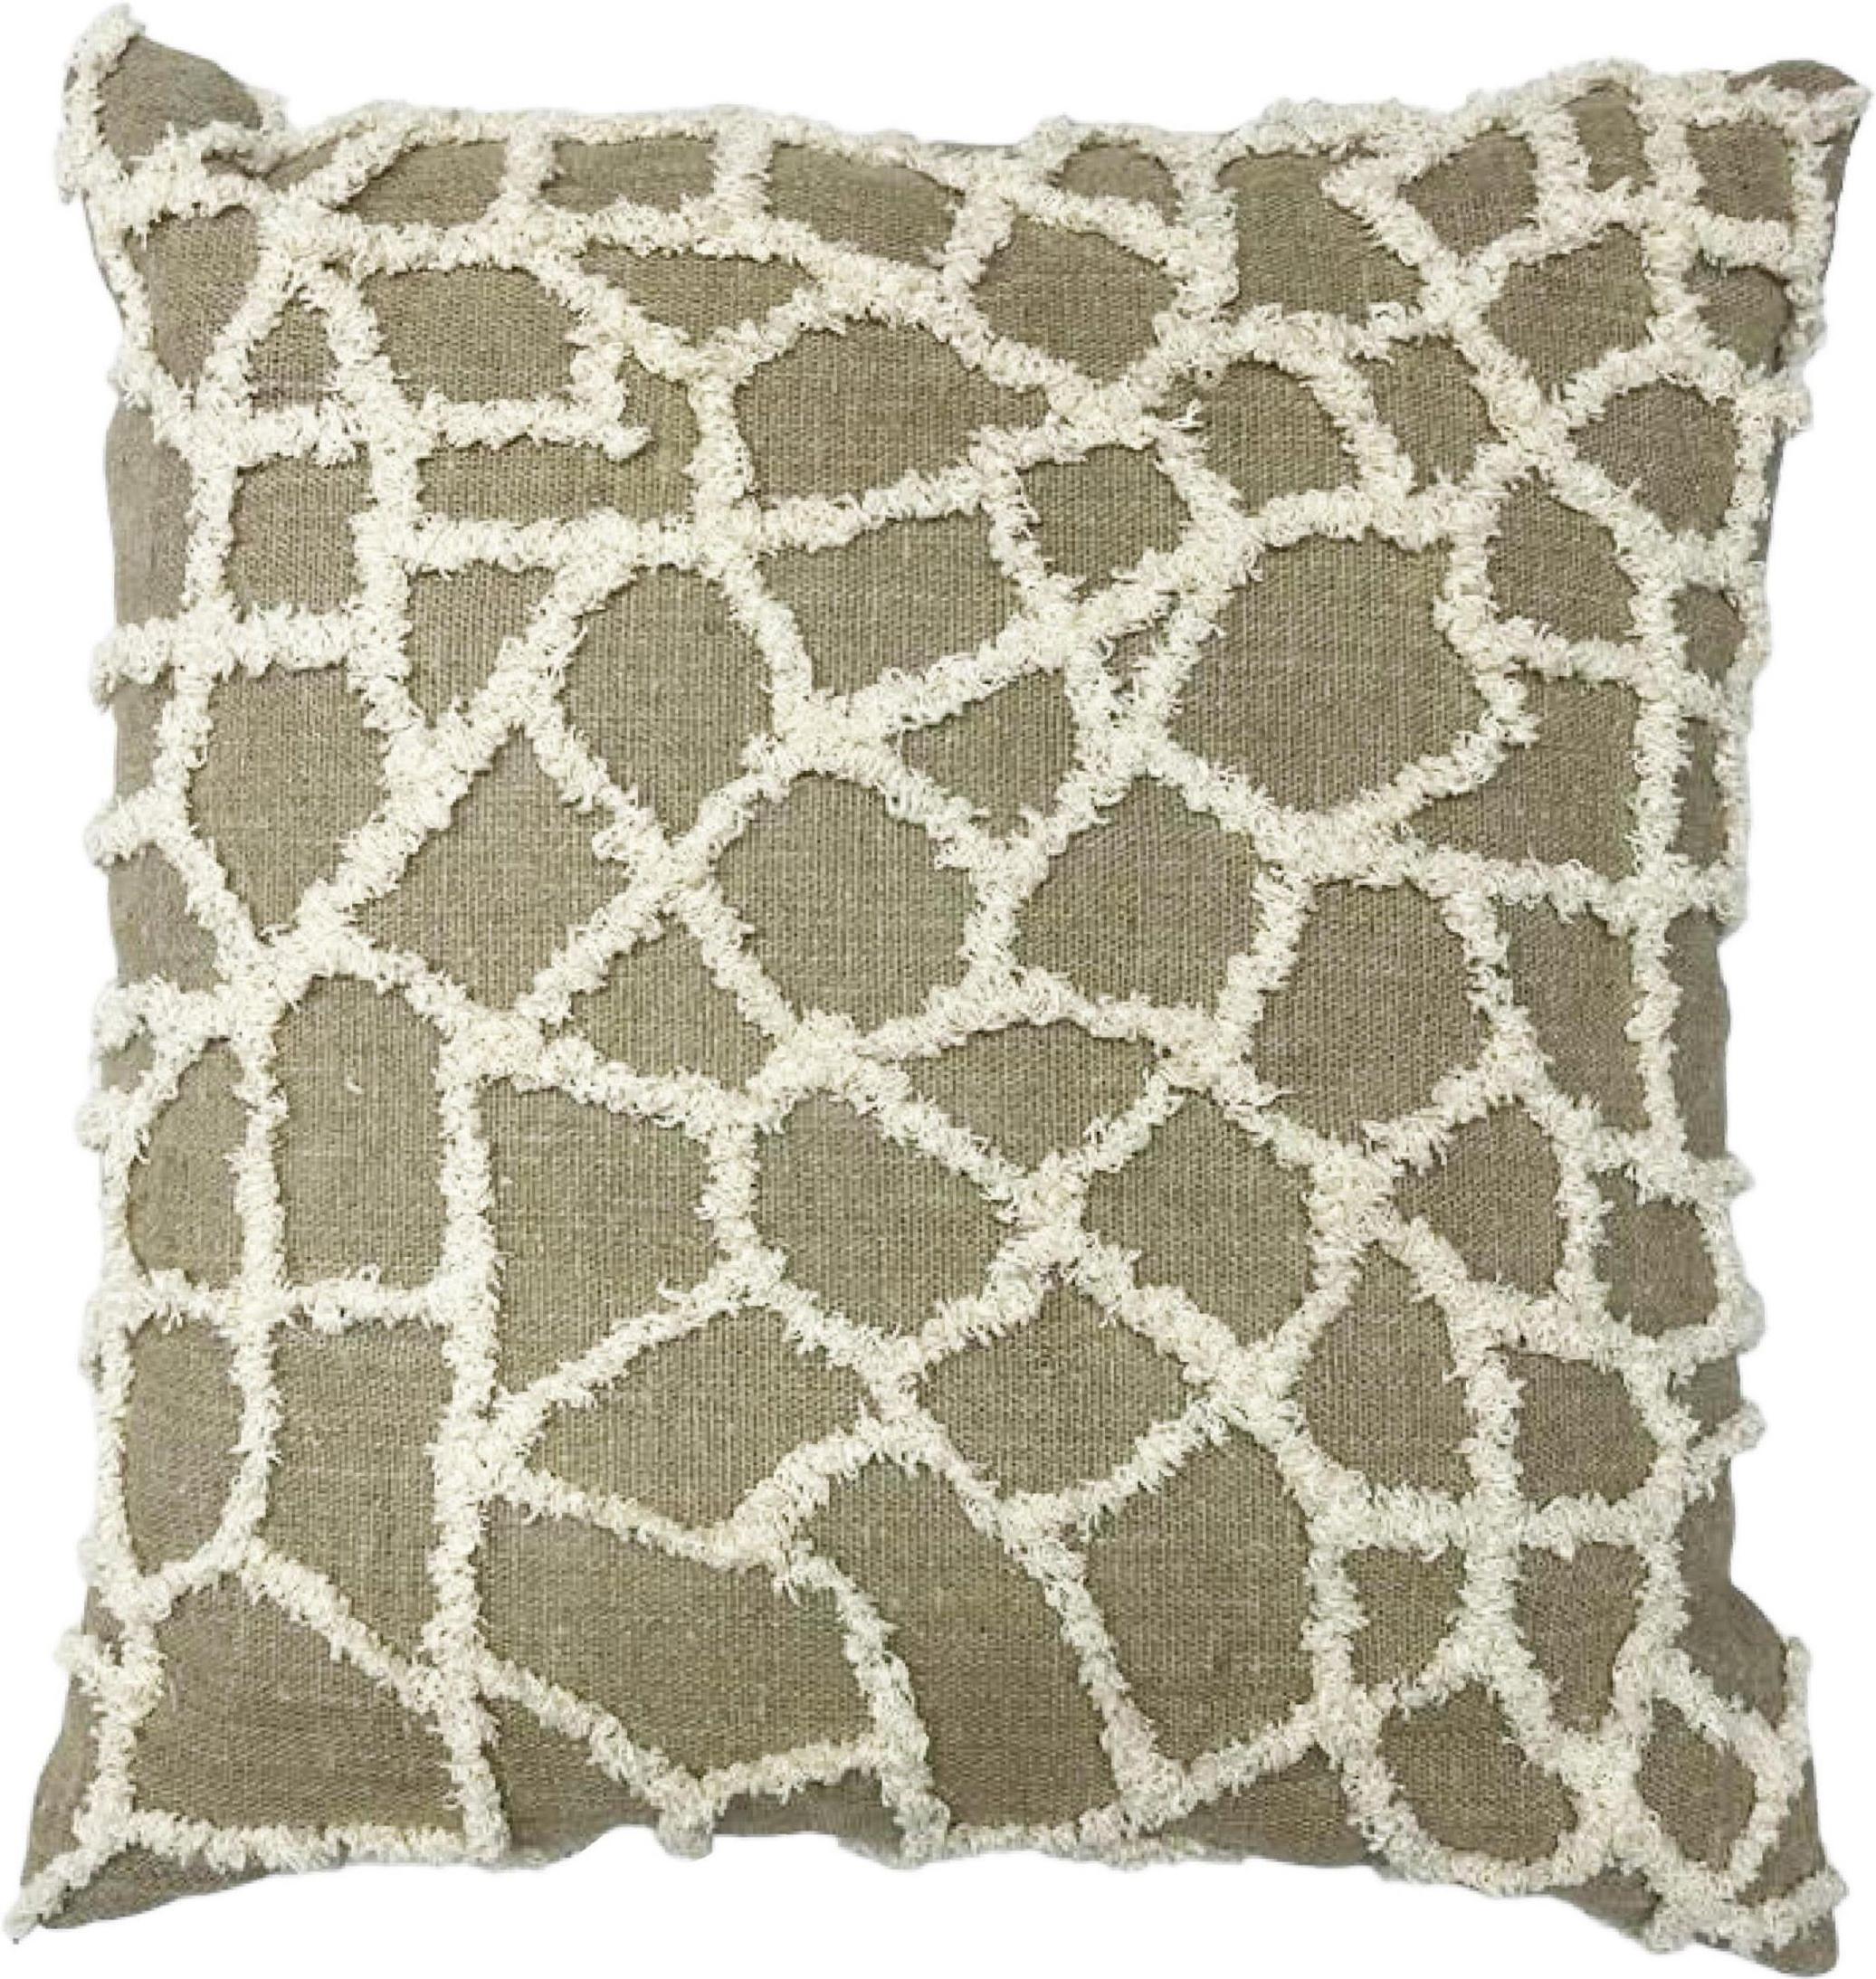 Indian Boho Chic Style Modern Wool and Cotton Pillow In Taupe Color For Sale